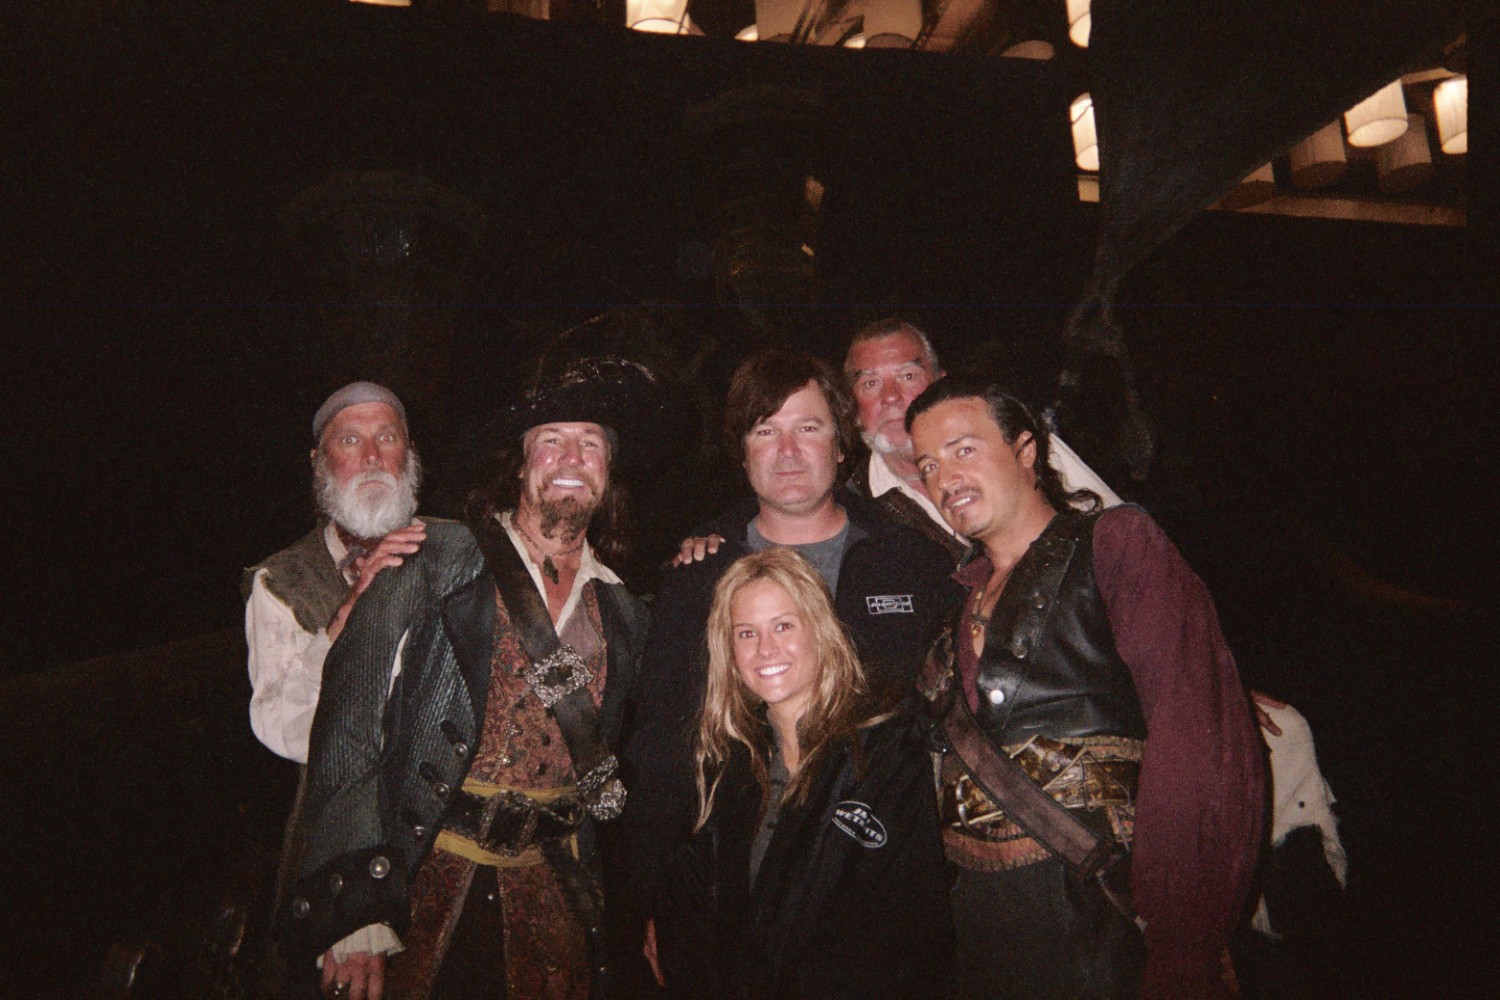 Pat Finerty with Director Gore Verbinski on the set of Disney's PIRATES OF THE CARIBBEAN 3